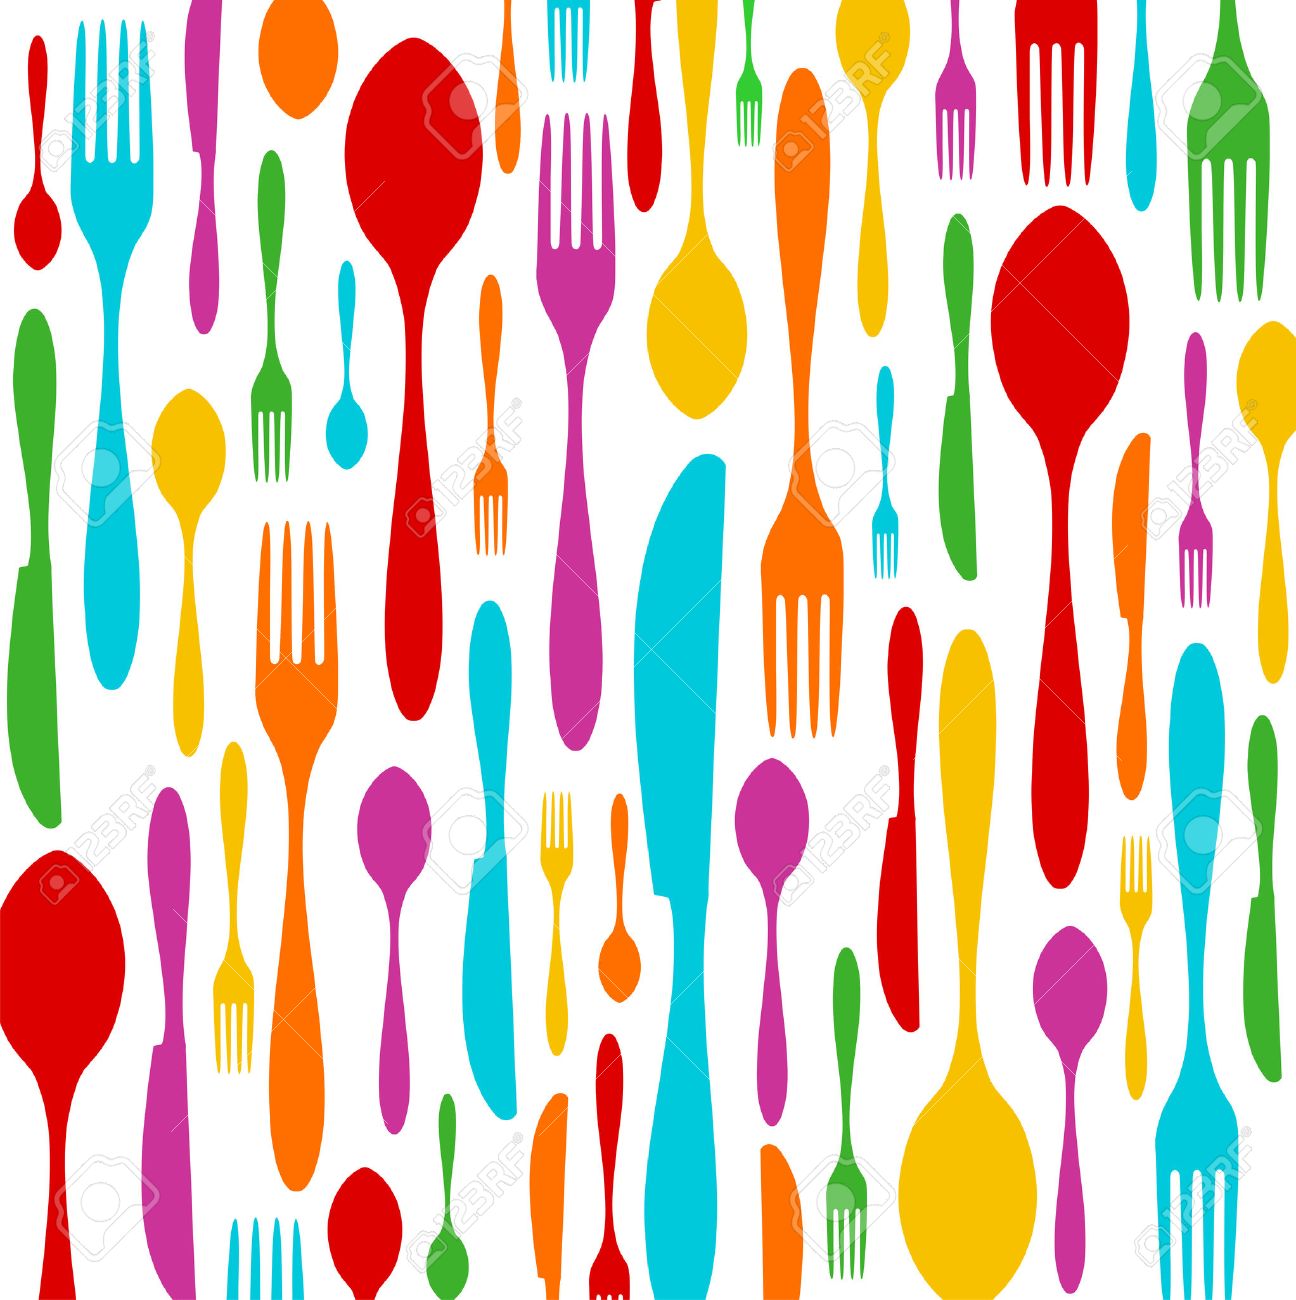 Cutlery Colorful Silhouettes Background Spoon Knife And Fork